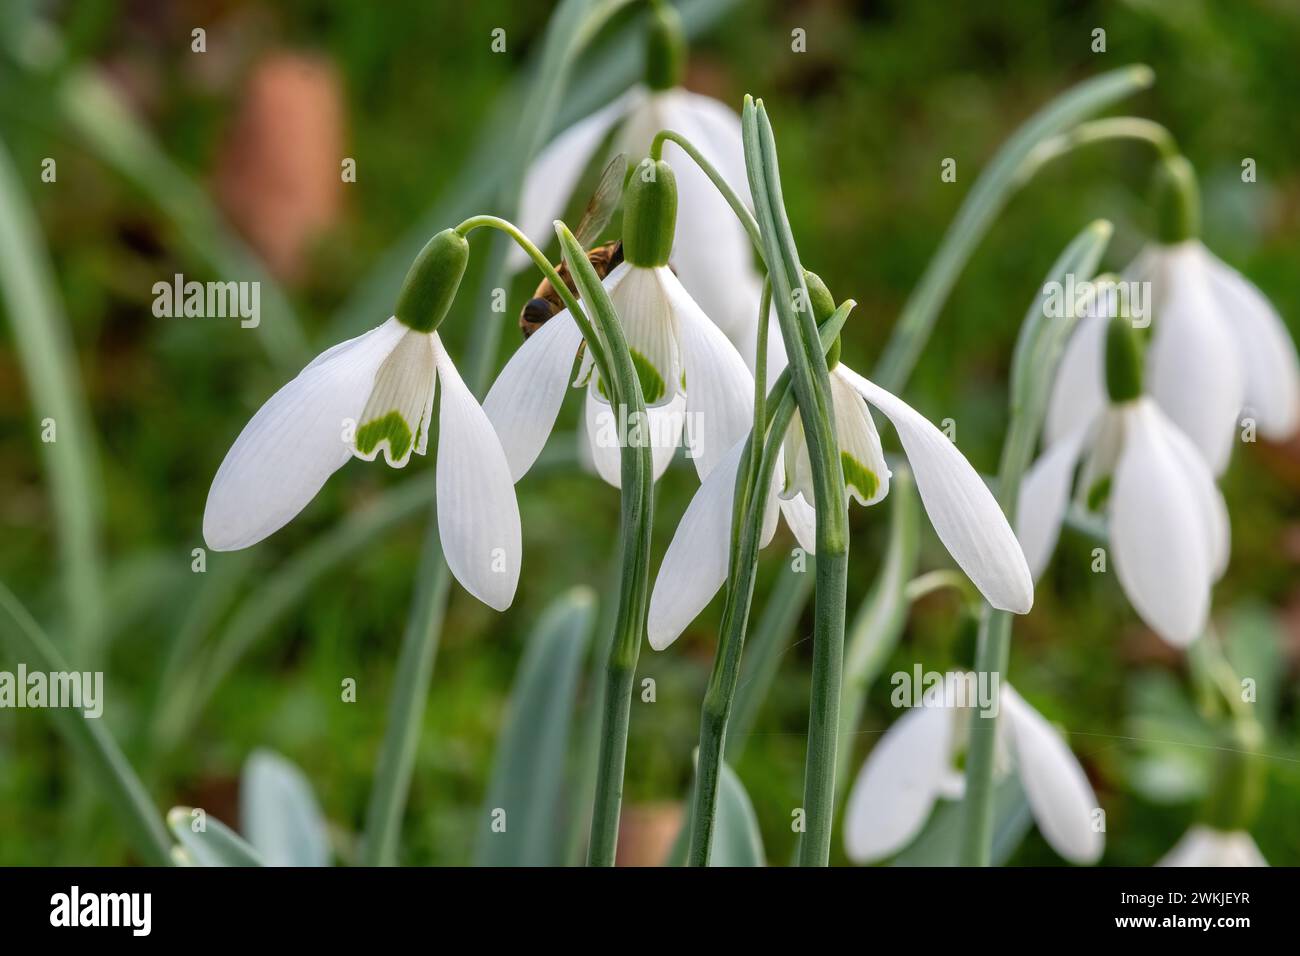 Galanthus 'Winifrede Mathias' snowdrop snowdrops flowers in a garden during February, England, UK Stock Photo